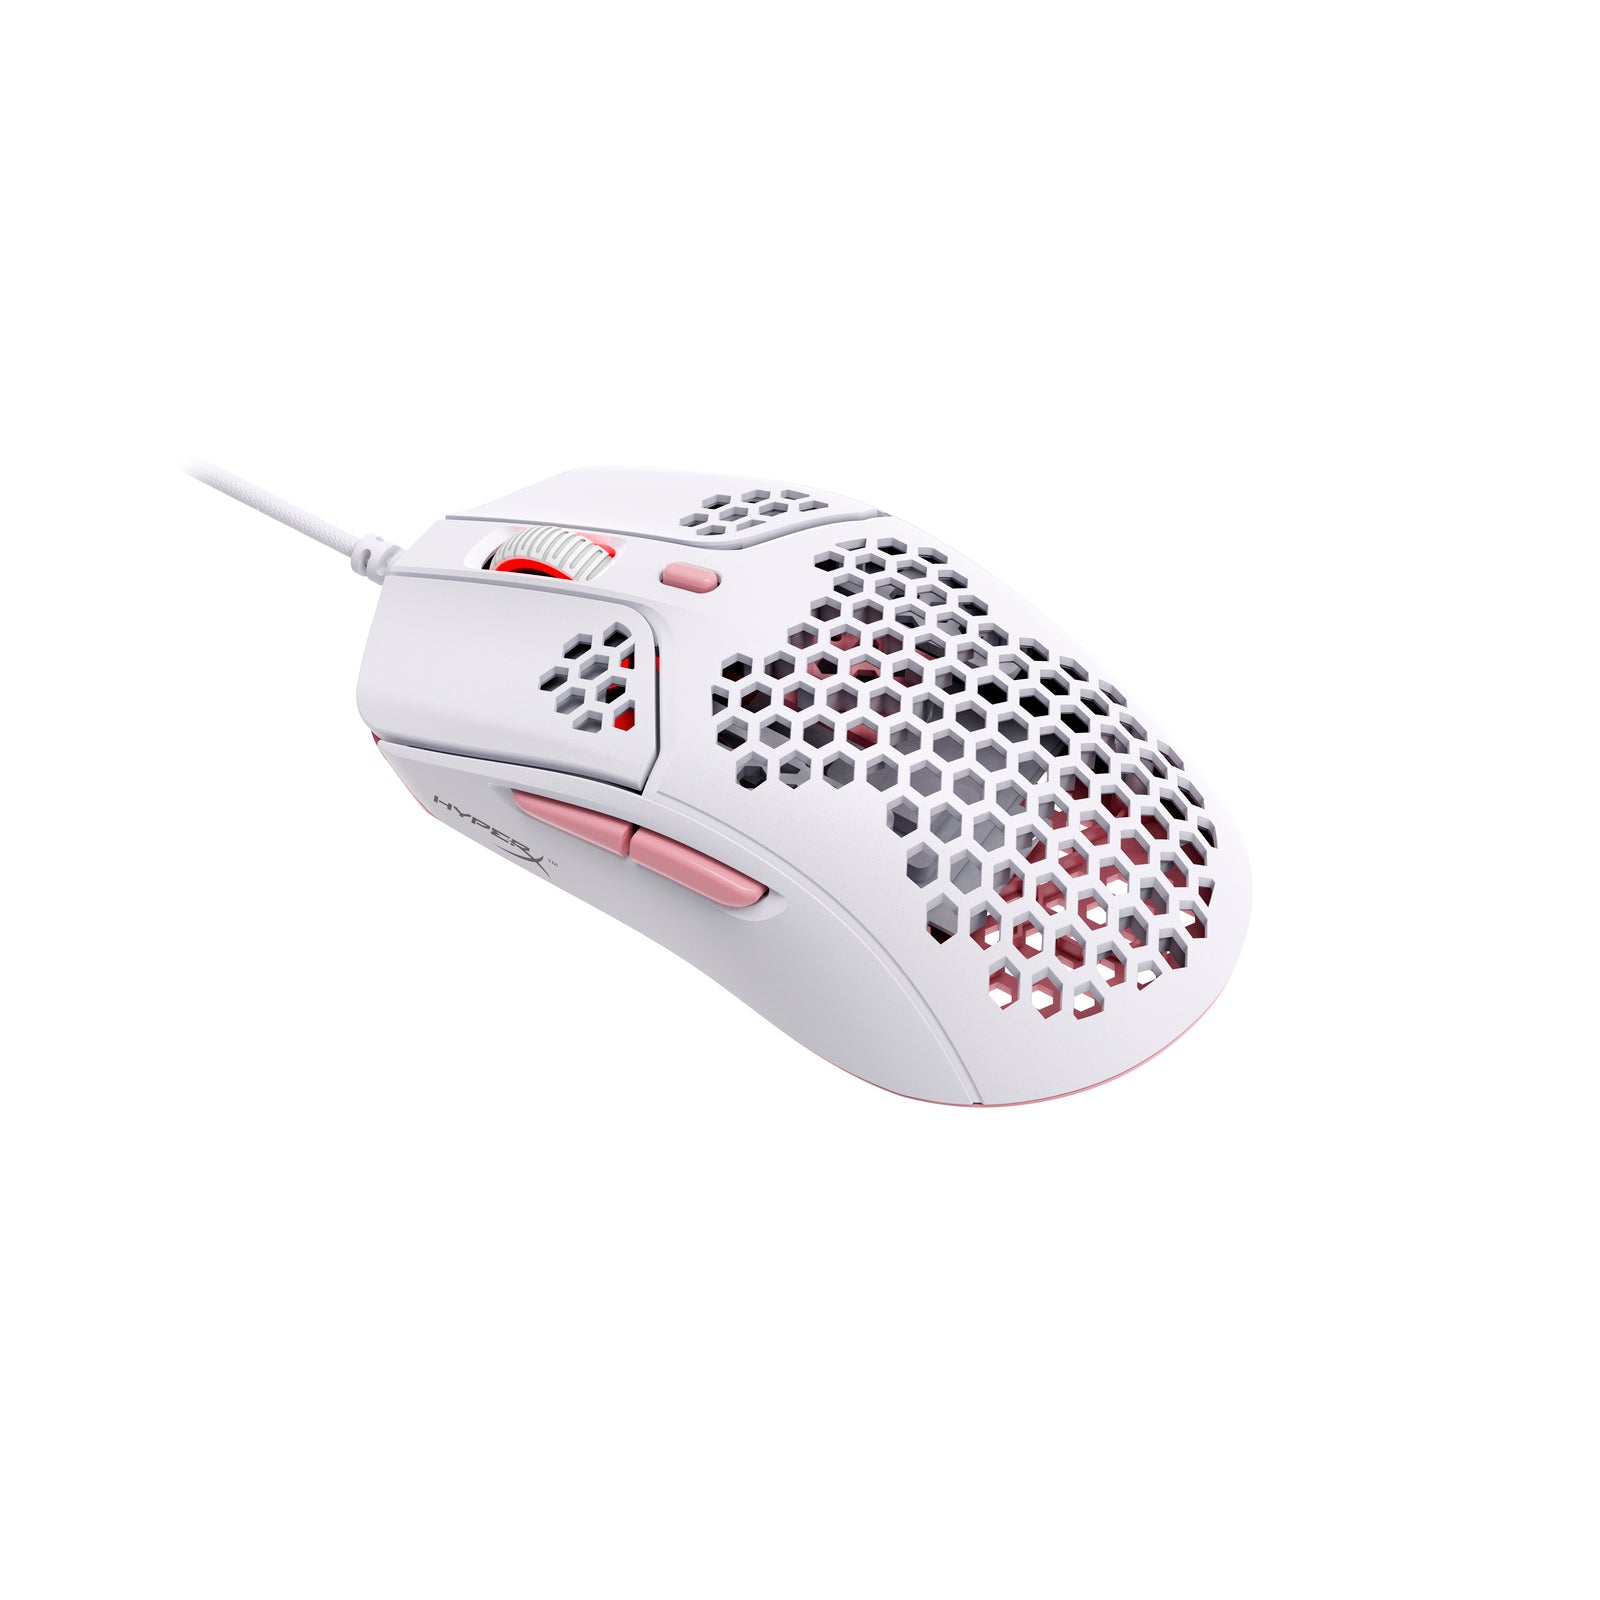 HyperX - Pulsefire Haste Wireless Gaming Mouse - White (4P5D8AA